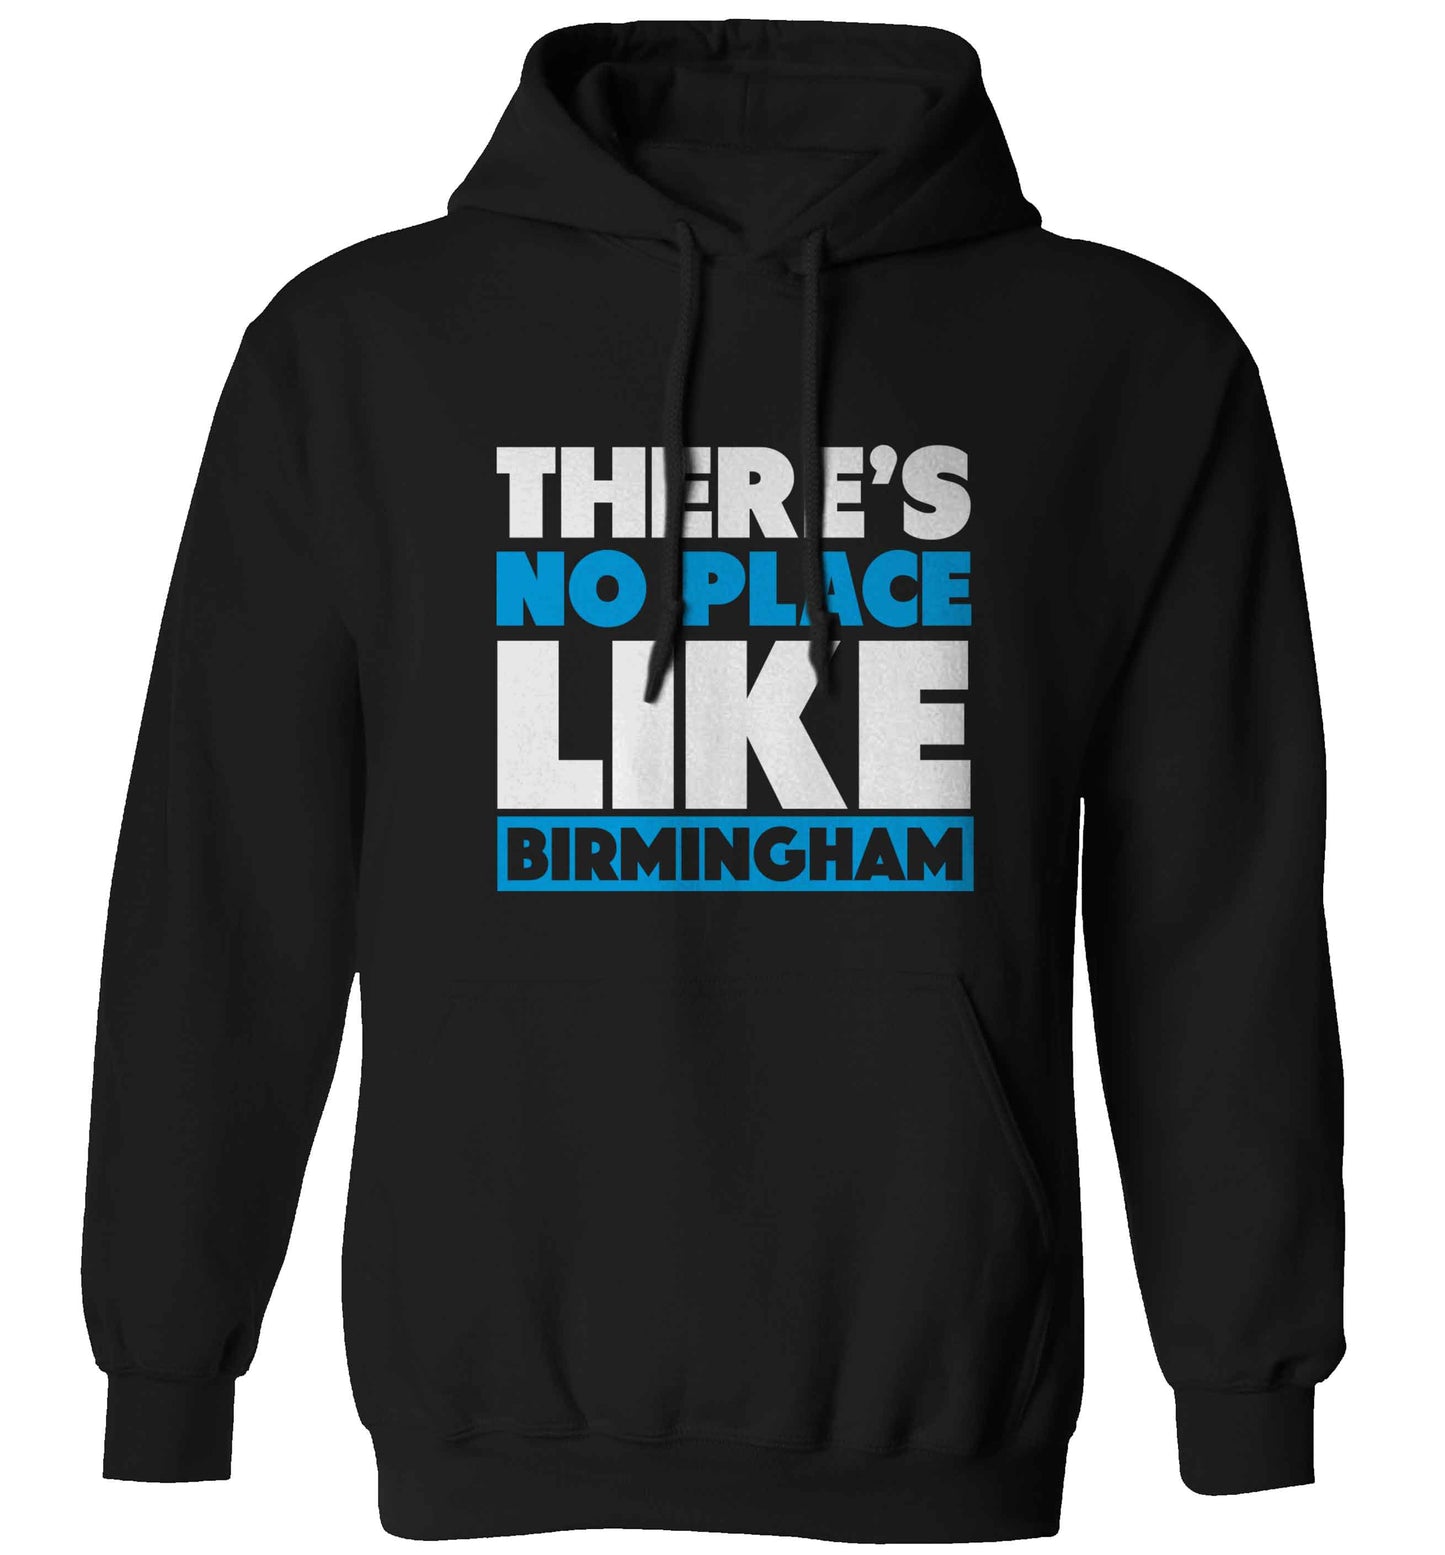 There's no place like Birmingham adults unisex black hoodie 2XL